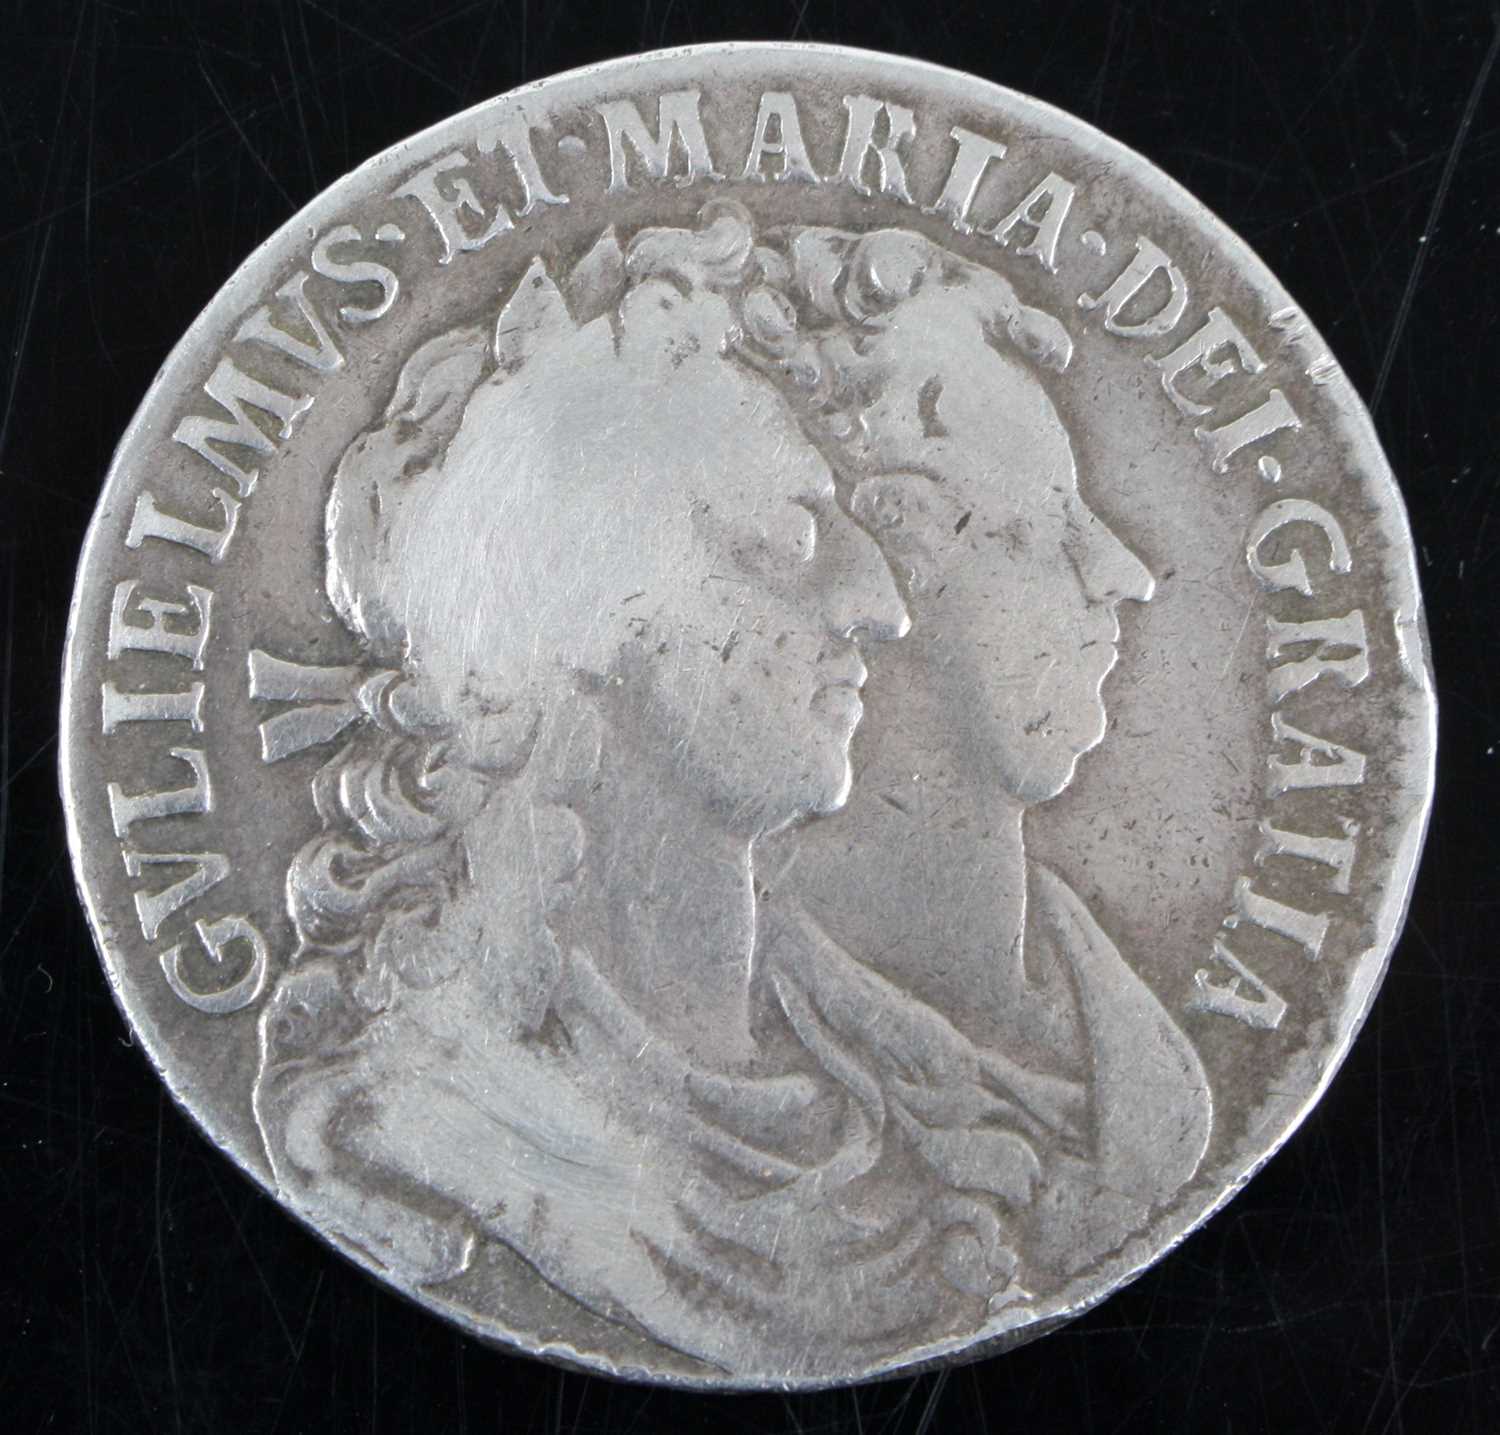 England, 1689 half crown, obv: first laureate co-joined busts of King William and Queen Mary